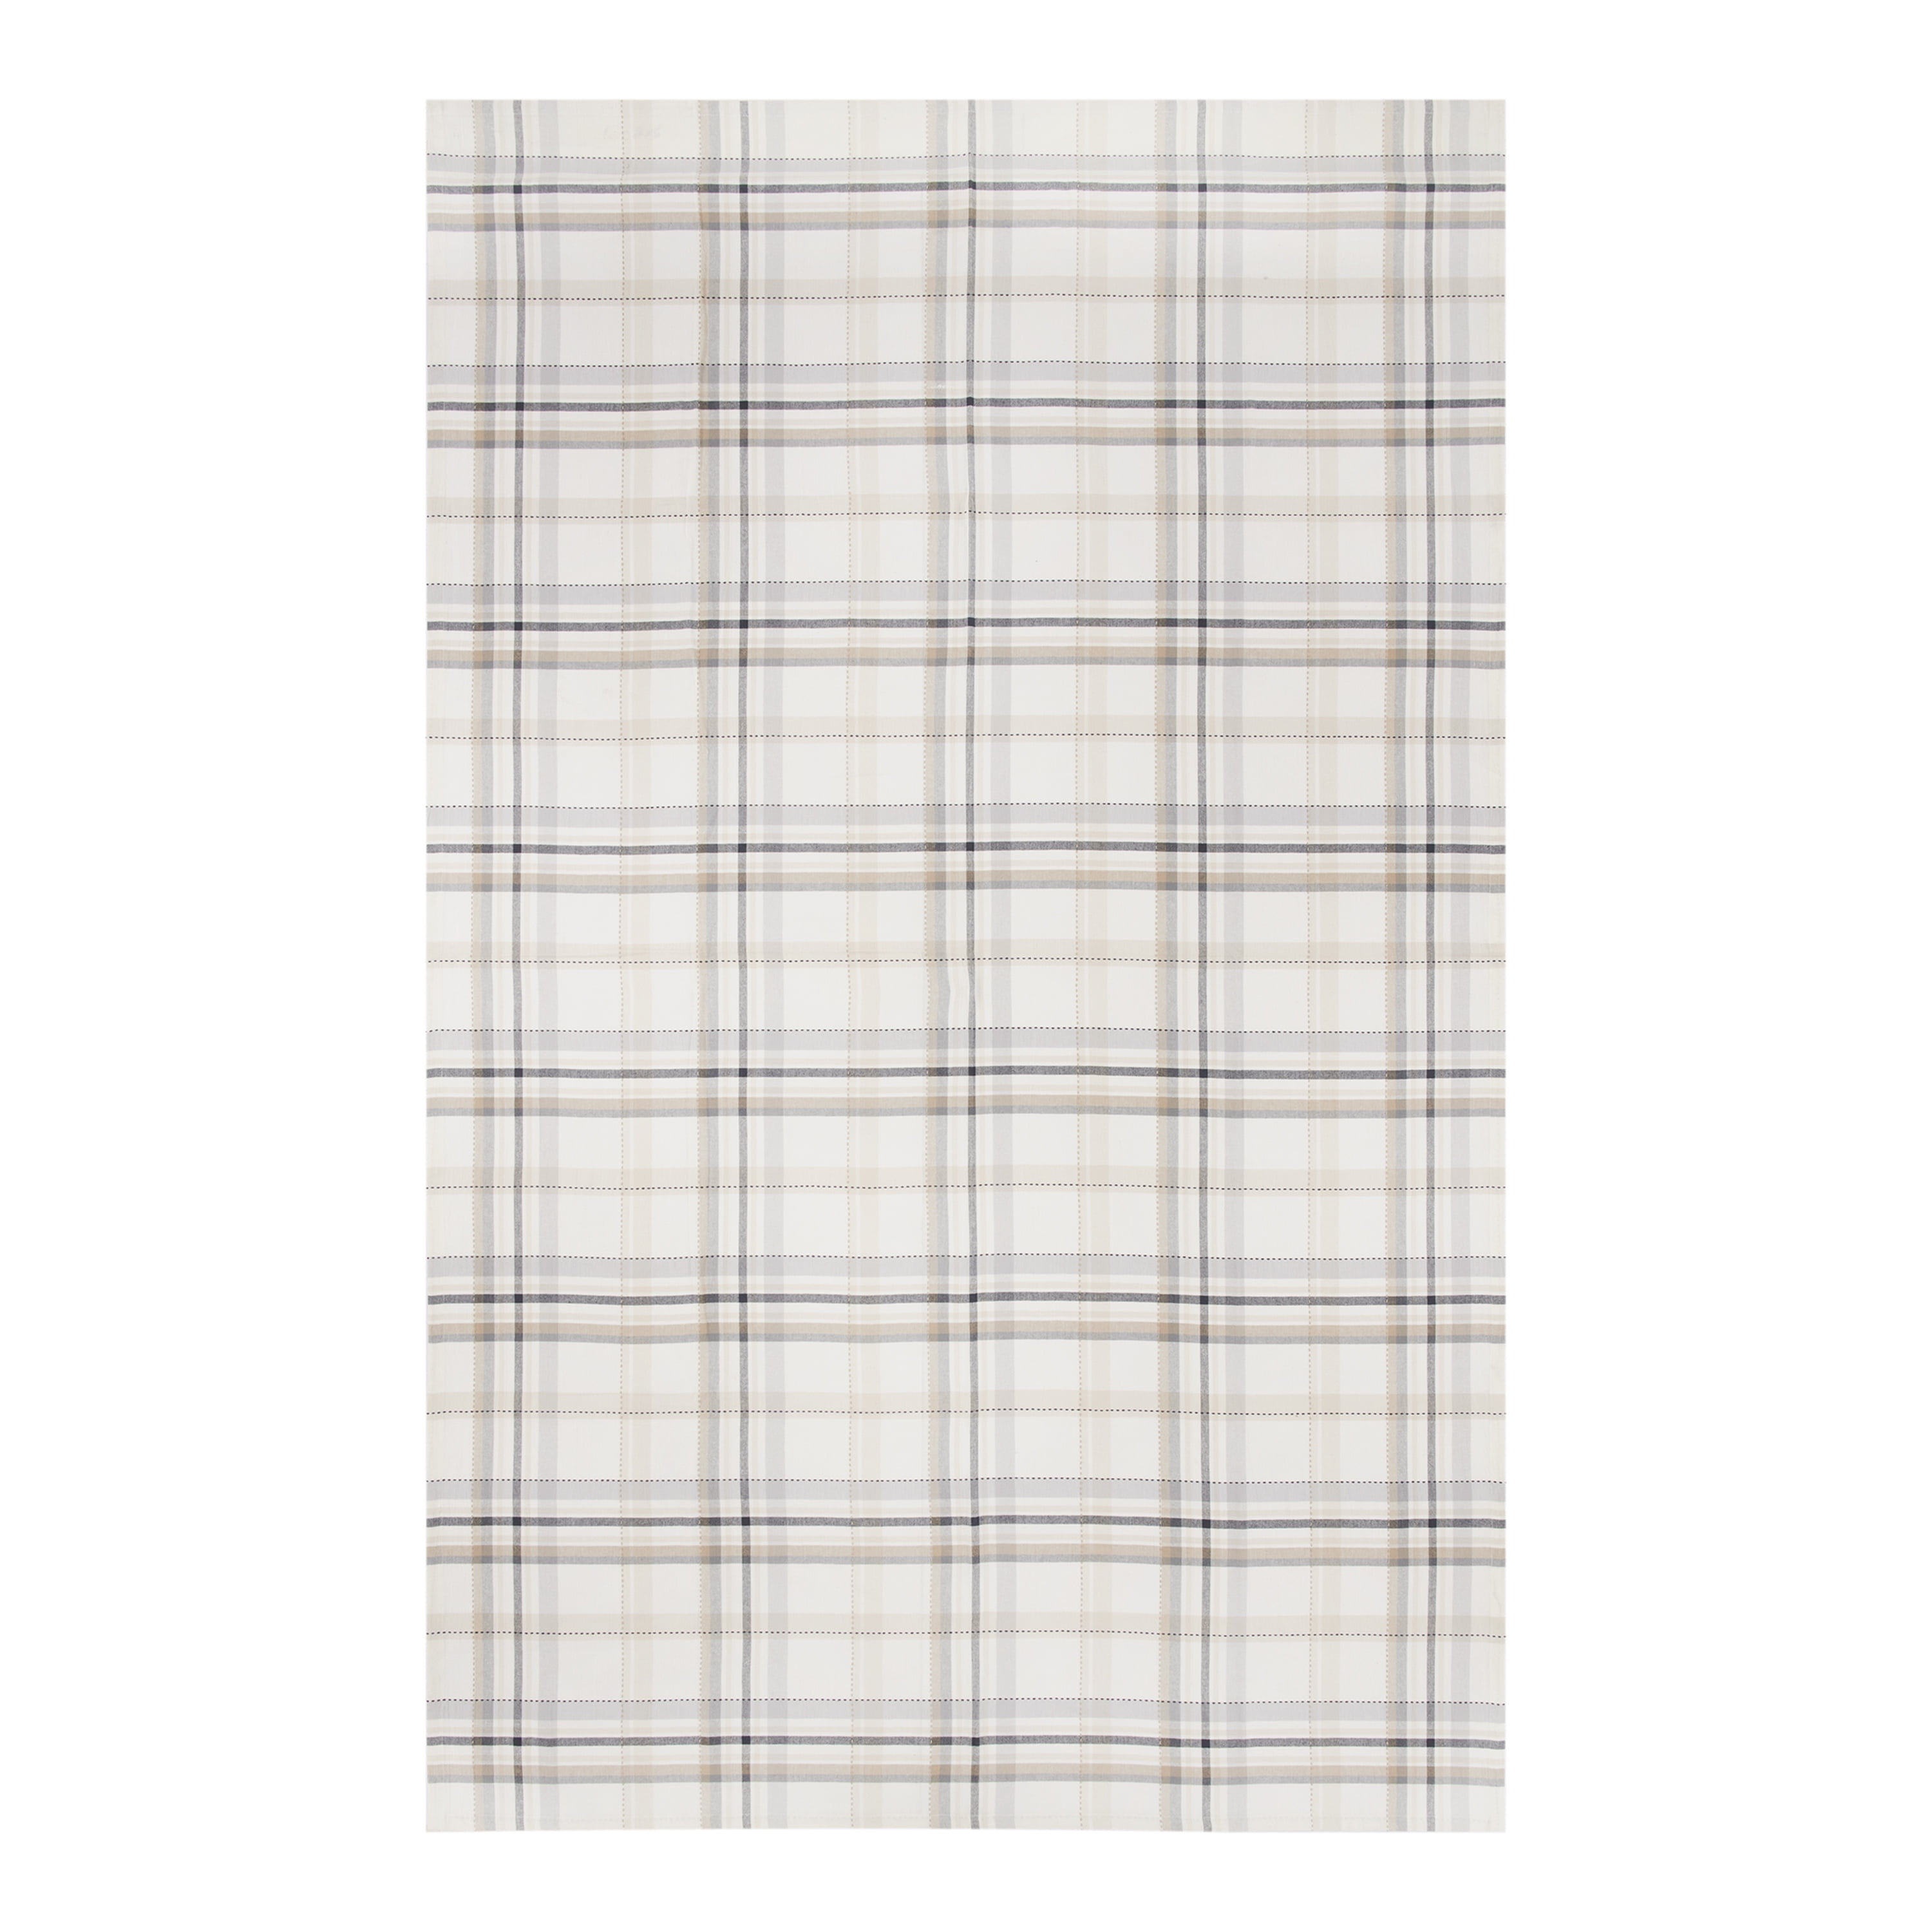 Better Homes and Gardens Woven Monday Plaid Table Cloth - Multi color - 60"x 102"